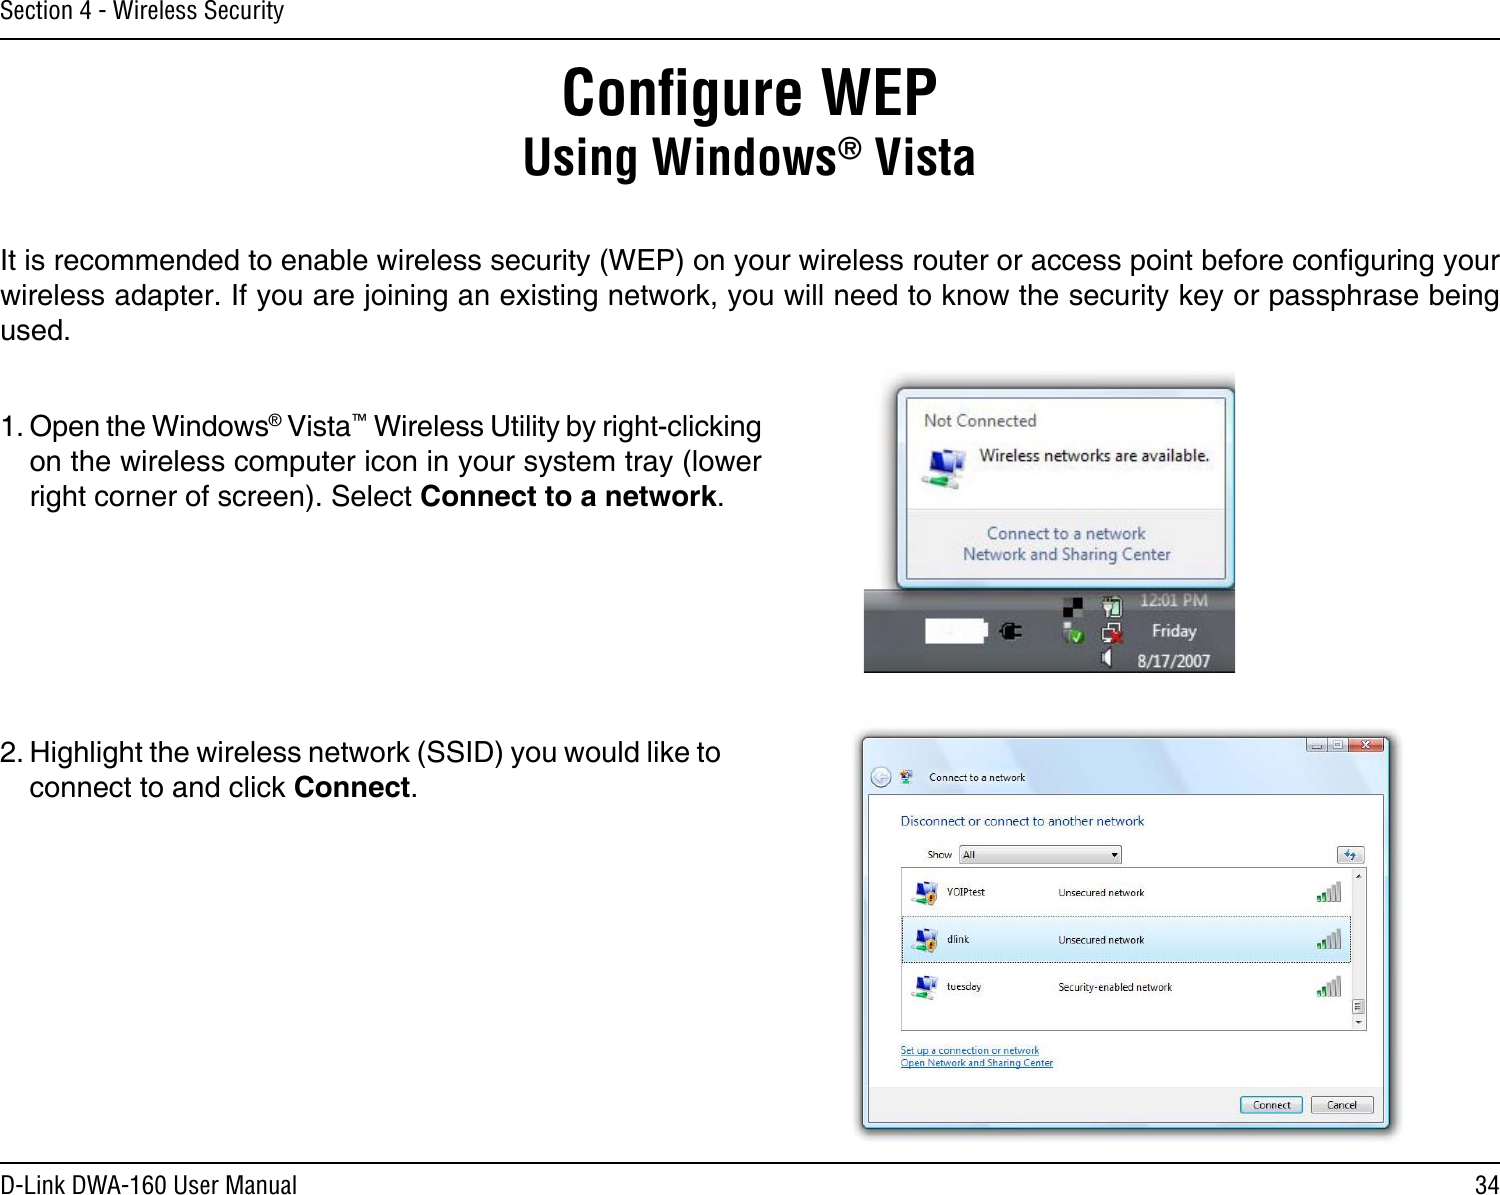 34D-Link DWA-160 User ManualSection 4 - Wireless SecurityConﬁgure WEPUsing Windows® VistaIt is recommended to enable wireless security (WEP) on your wireless router or access point before conguring your wireless adapter. If you are joining an existing network, you will need to know the security key or passphrase being used.2. Highlight the wireless network (SSID) you would like to connect to and click Connect.1. Open the Windows® Vista™ Wireless Utility by right-clicking on the wireless computer icon in your system tray (lower right corner of screen). Select Connect to a network. 